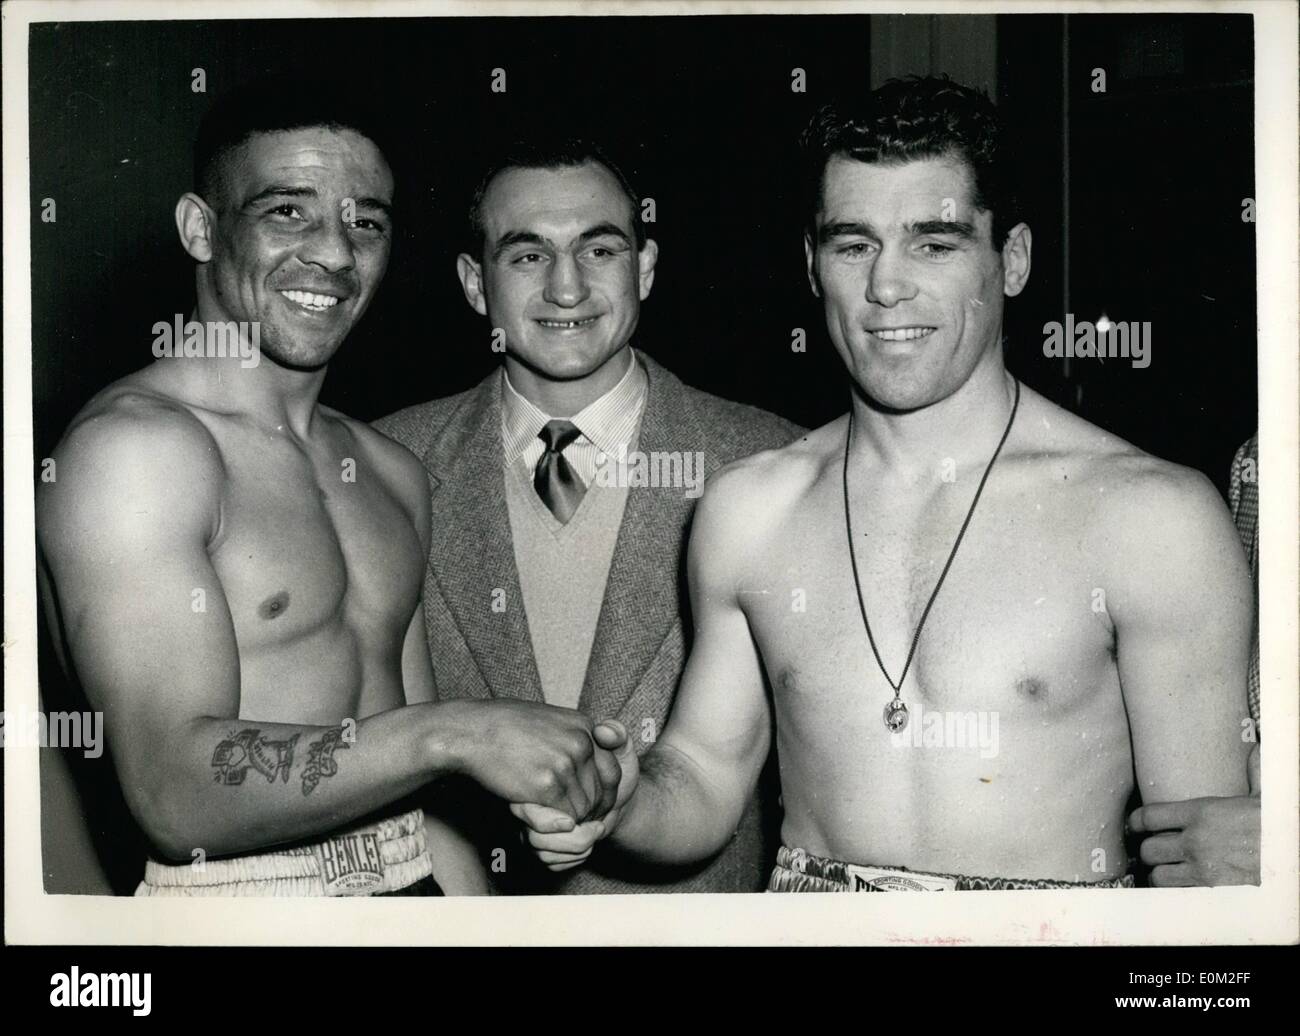 Mar. 17, 1953 - 17-3-53 Cartier and Turpin weigh in at Solomons Gym, Humez looks on. Walter Cartier, the American Mystery man and Randolph Turpin weighed in at Solomon's Gymnasium this afternoon for their contest tonight at Earls Court. Keystone Photo Shows: Randolph Turpin (left); Charles Humez, the French Champion and contender for World Middleweight Title; and Walter Cartier on right, after the weigh in this afternoon. Stock Photo